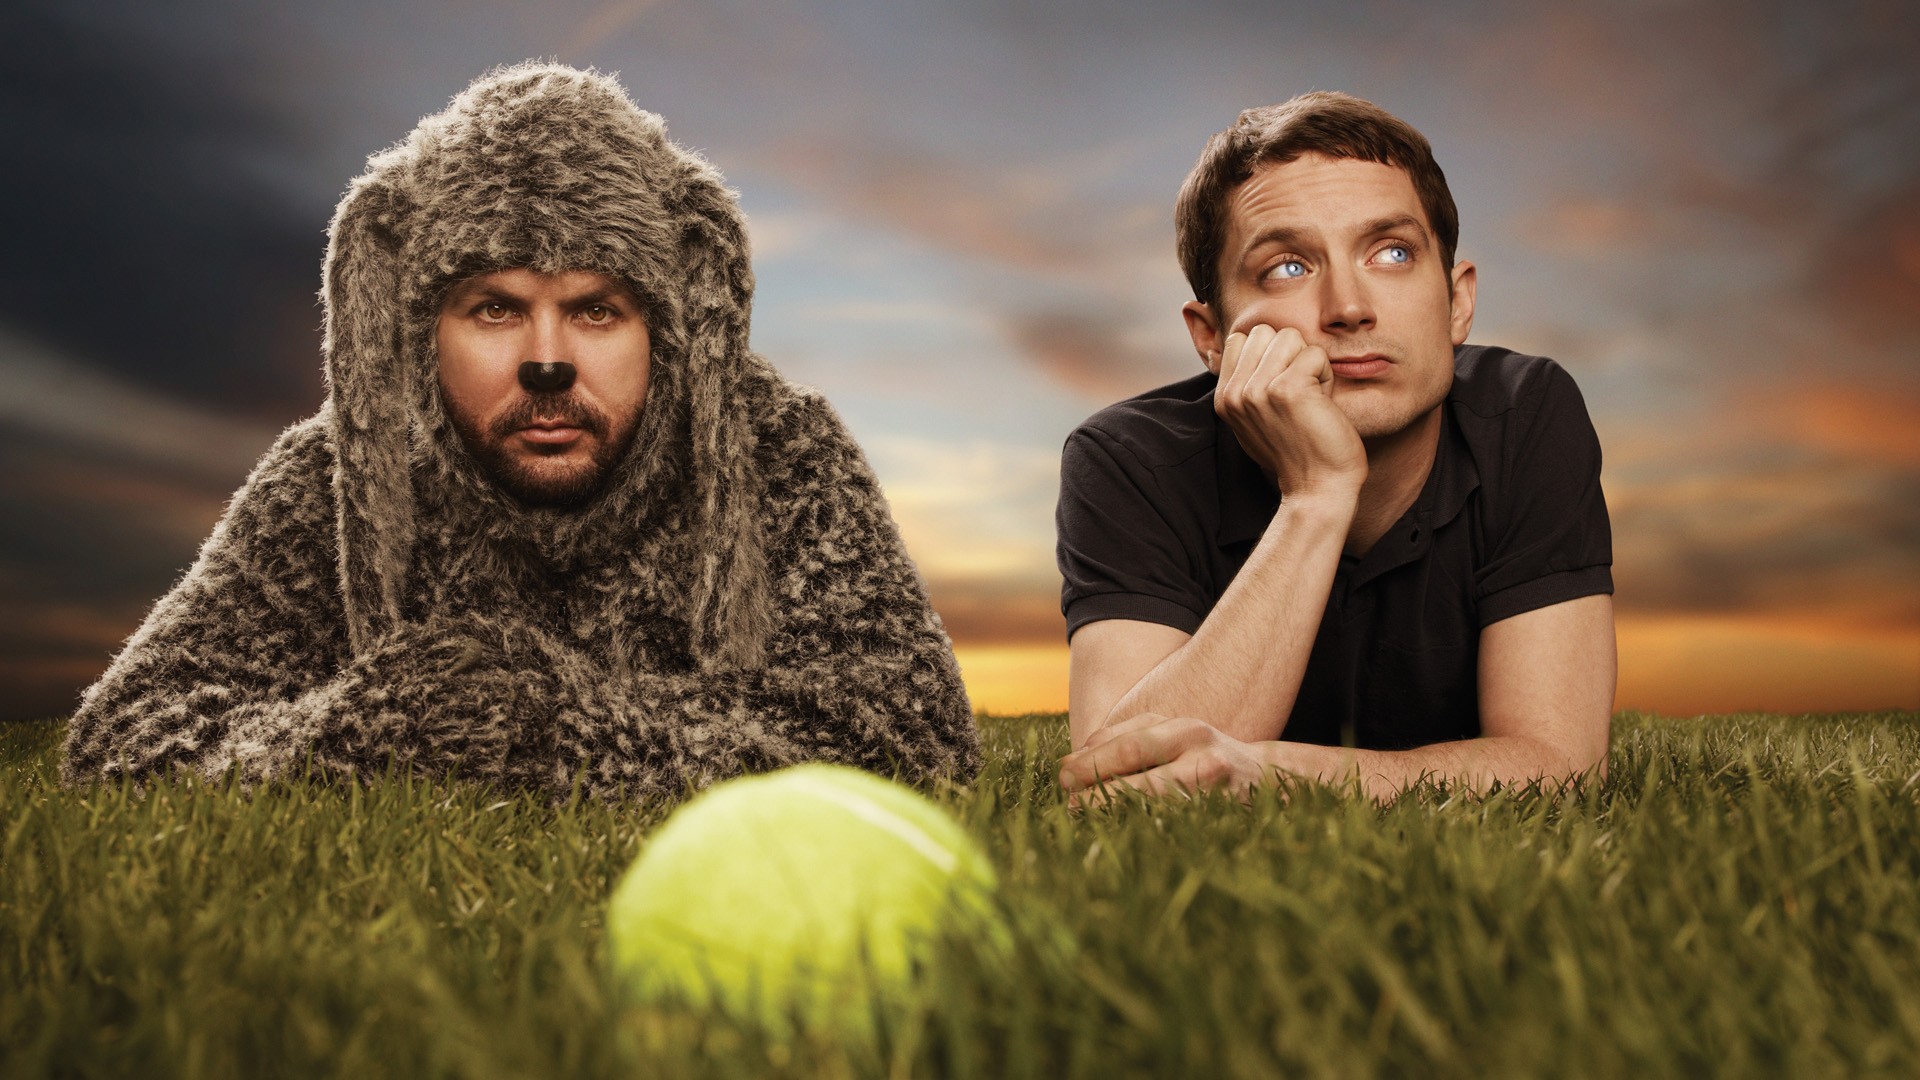 Wilfred background